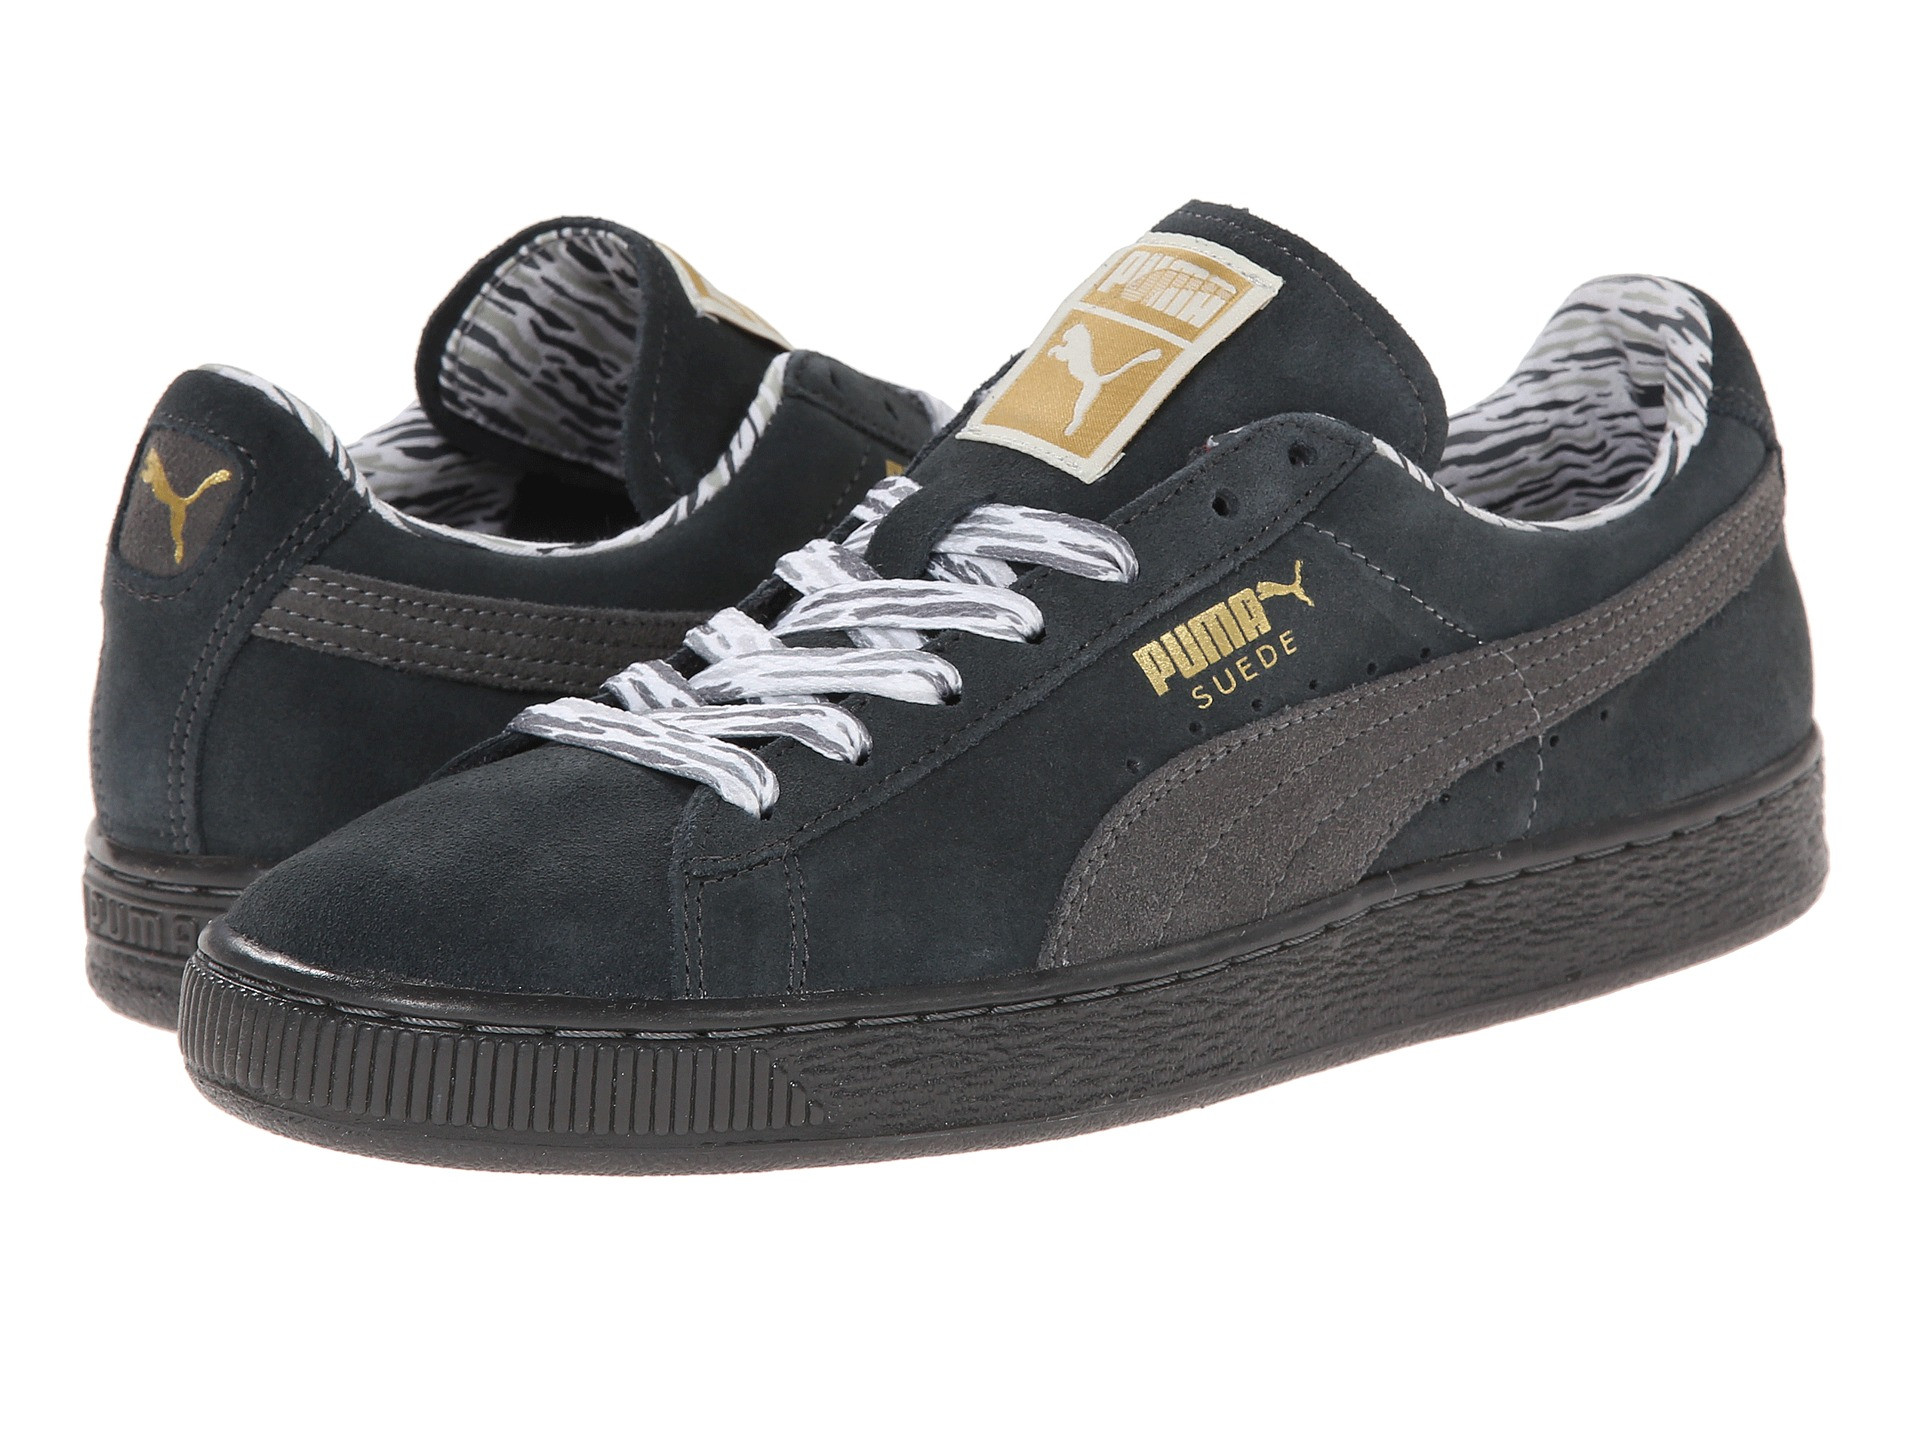 Buy > puma suede classic fit > in stock